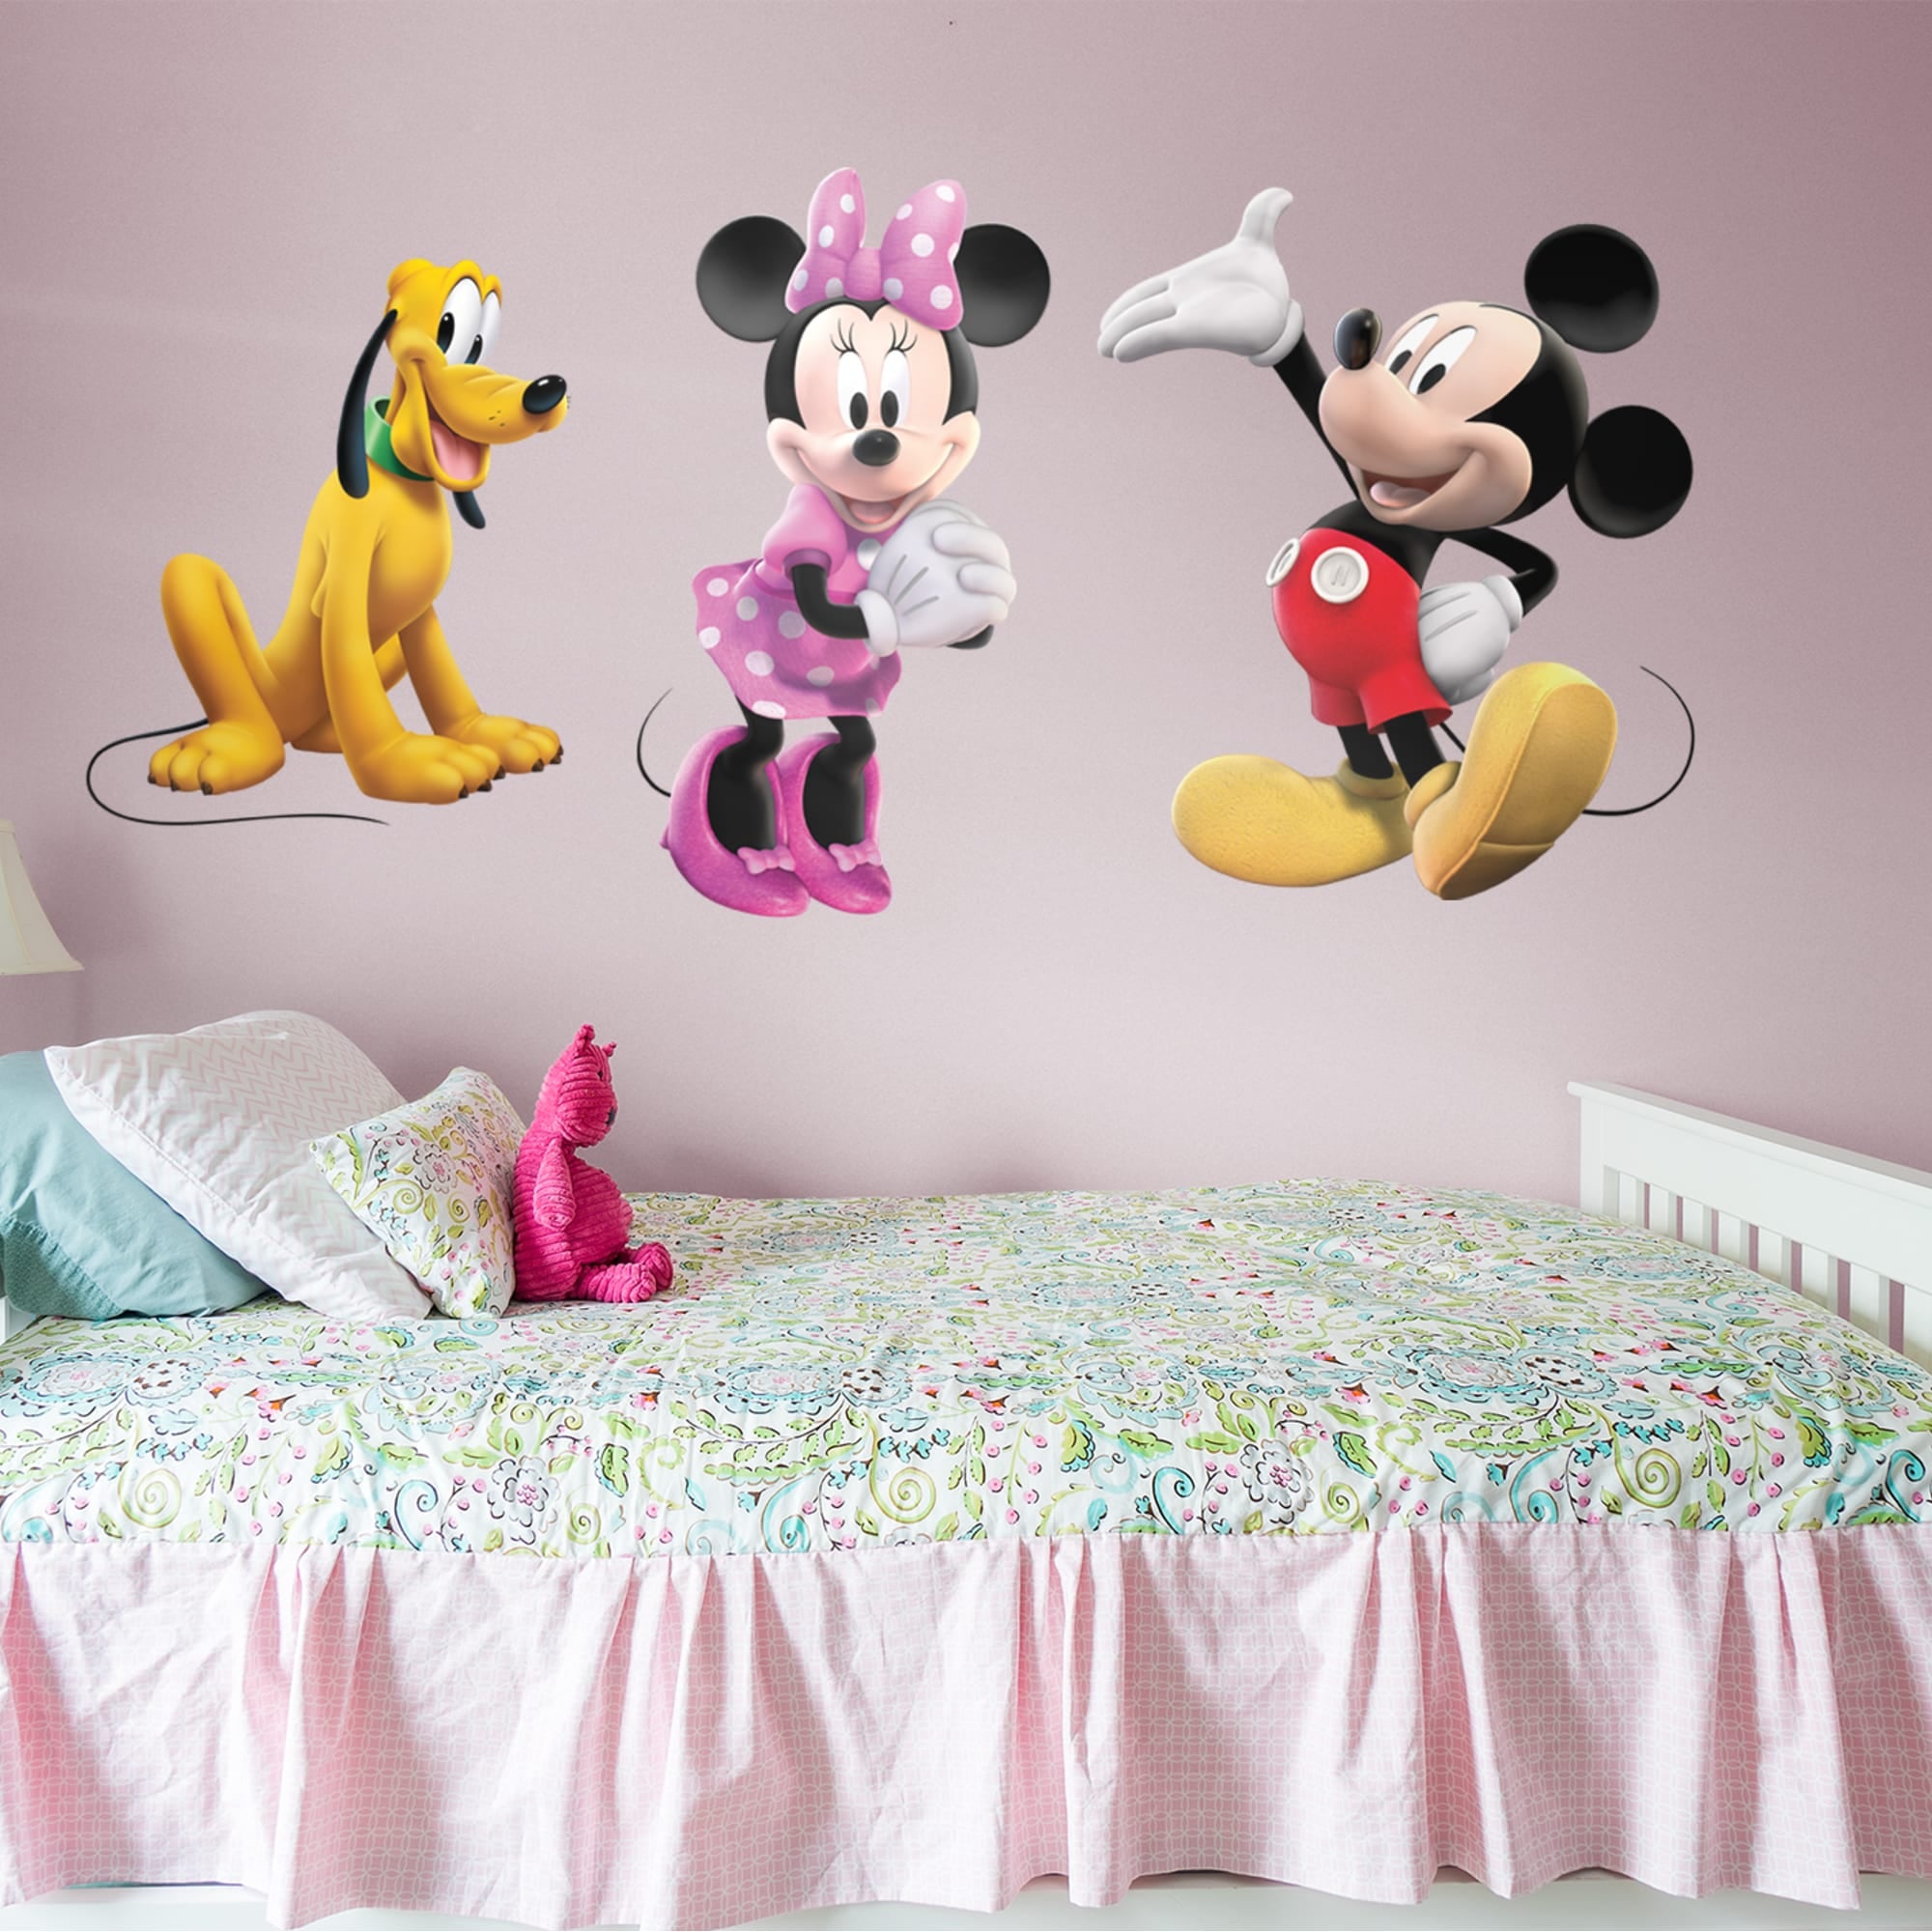 Disney: Mickey, Minnie & Pluto - Officially Licensed Removable Wall Decal 79.0"W x 51.5"H by Fathead | Vinyl